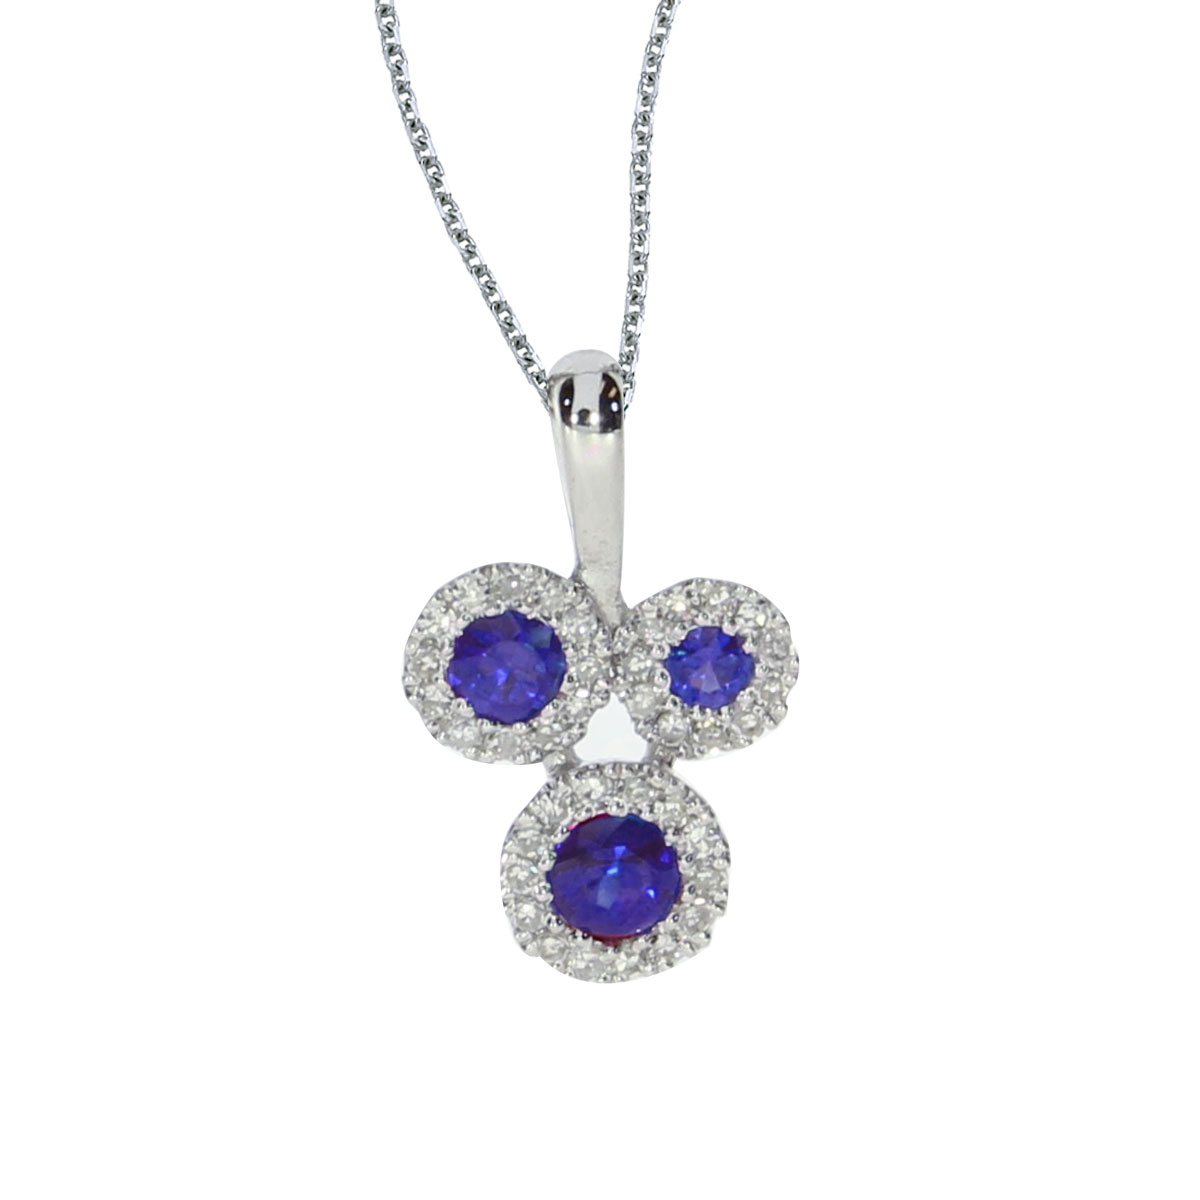 This 14k white gold pendant contains three 2.8 mm sapphires surrounded by .07 carats of shimmerin...